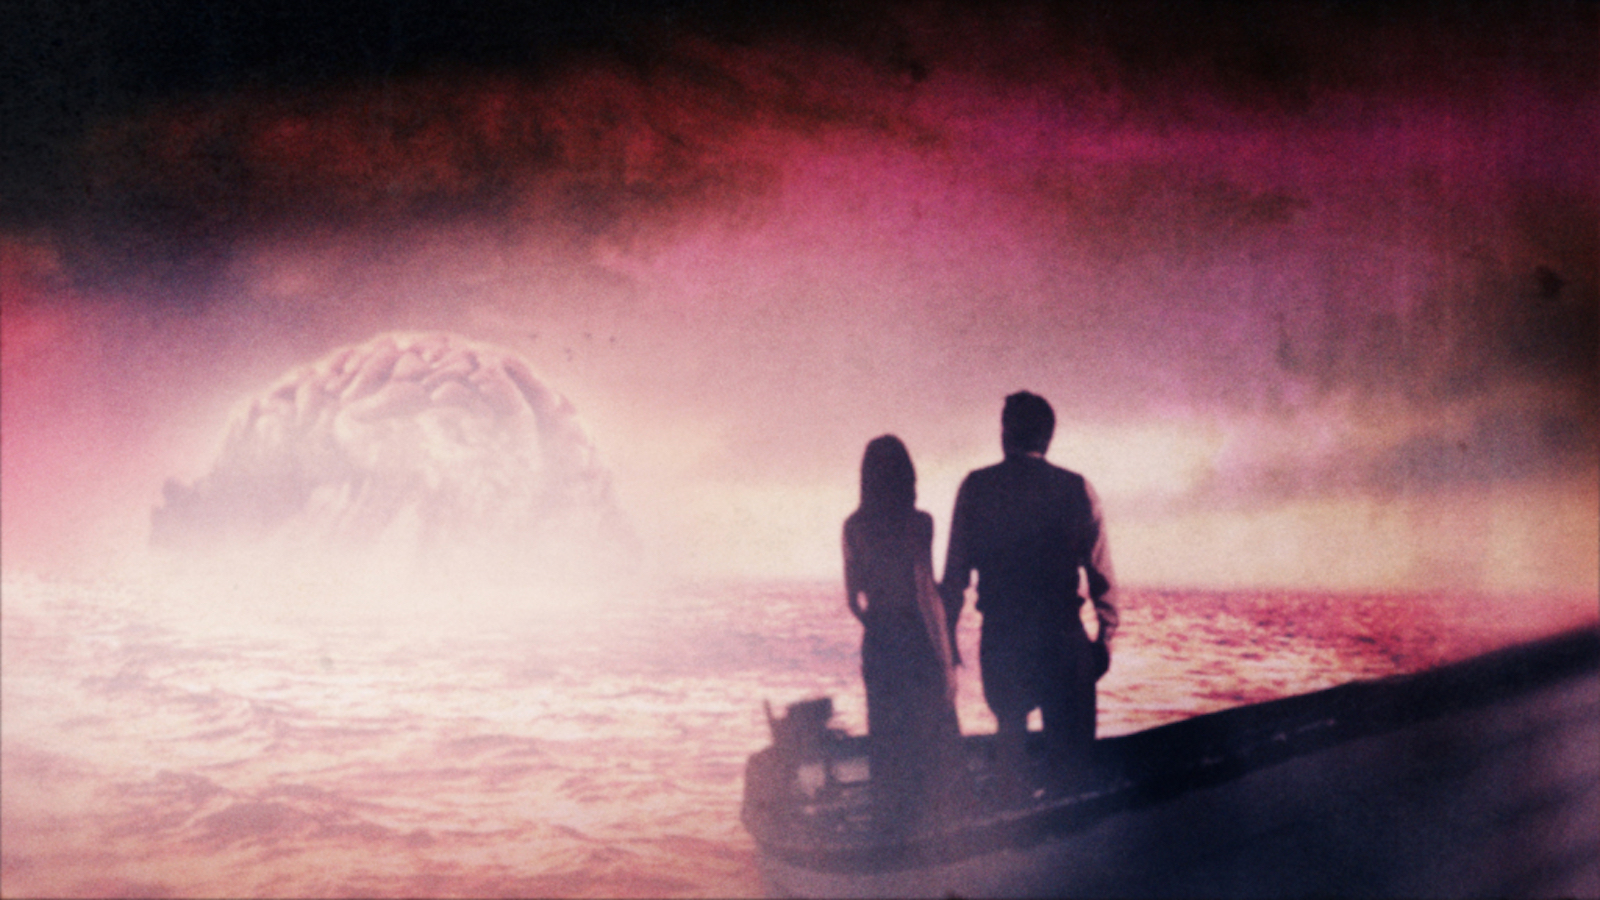 Two figures silhouetted standing on a rowboat in front of a red mist, with a gigantic cloud shaped like a brain in the distance.